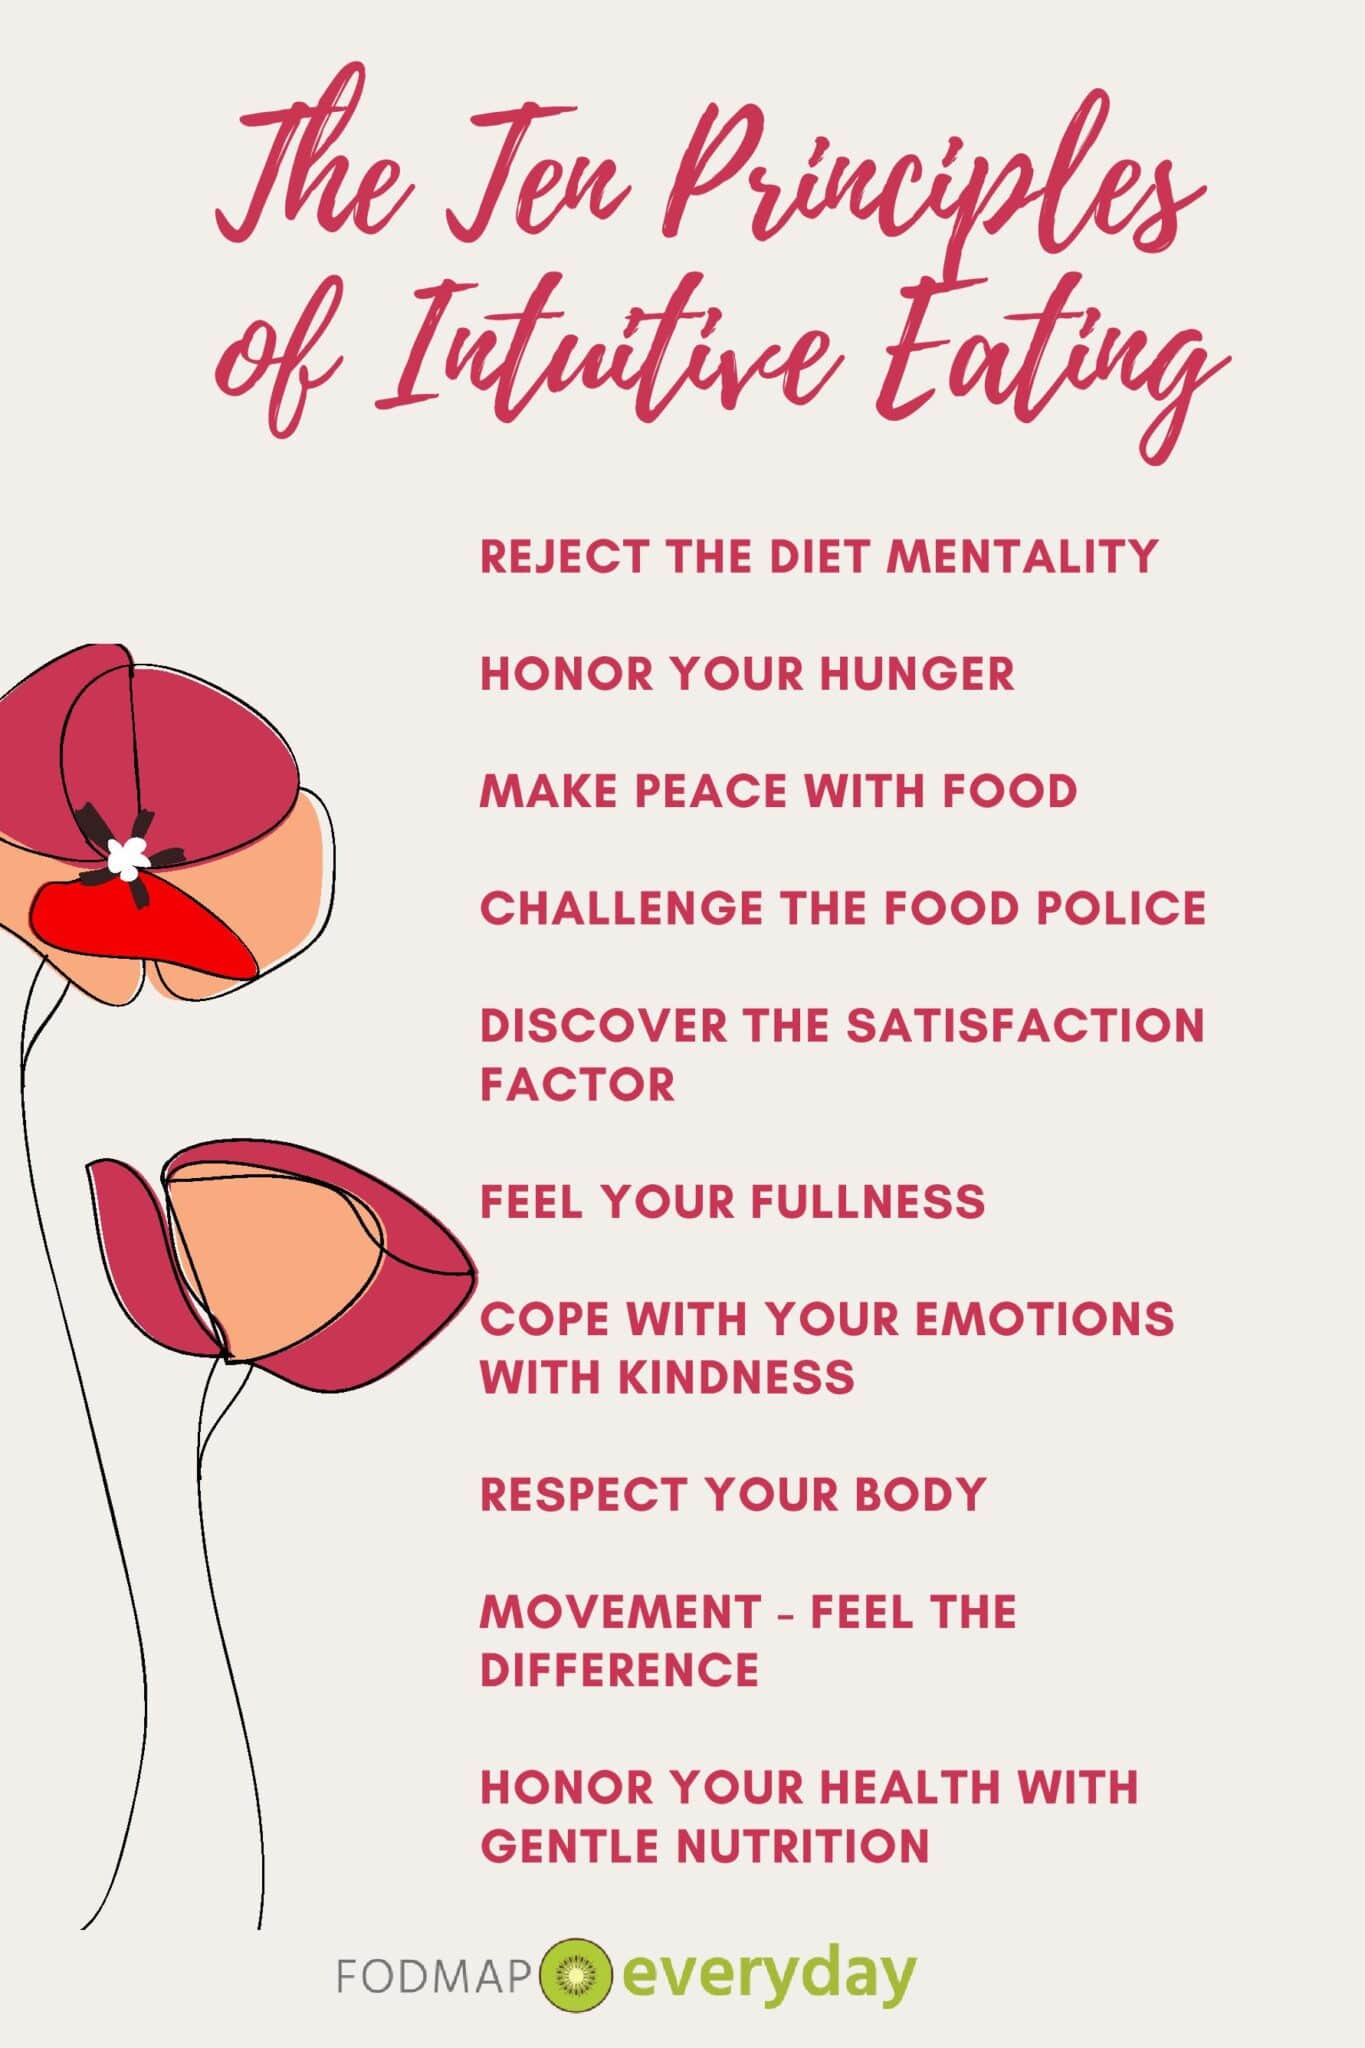 A list of the ten principles of intuitive eating